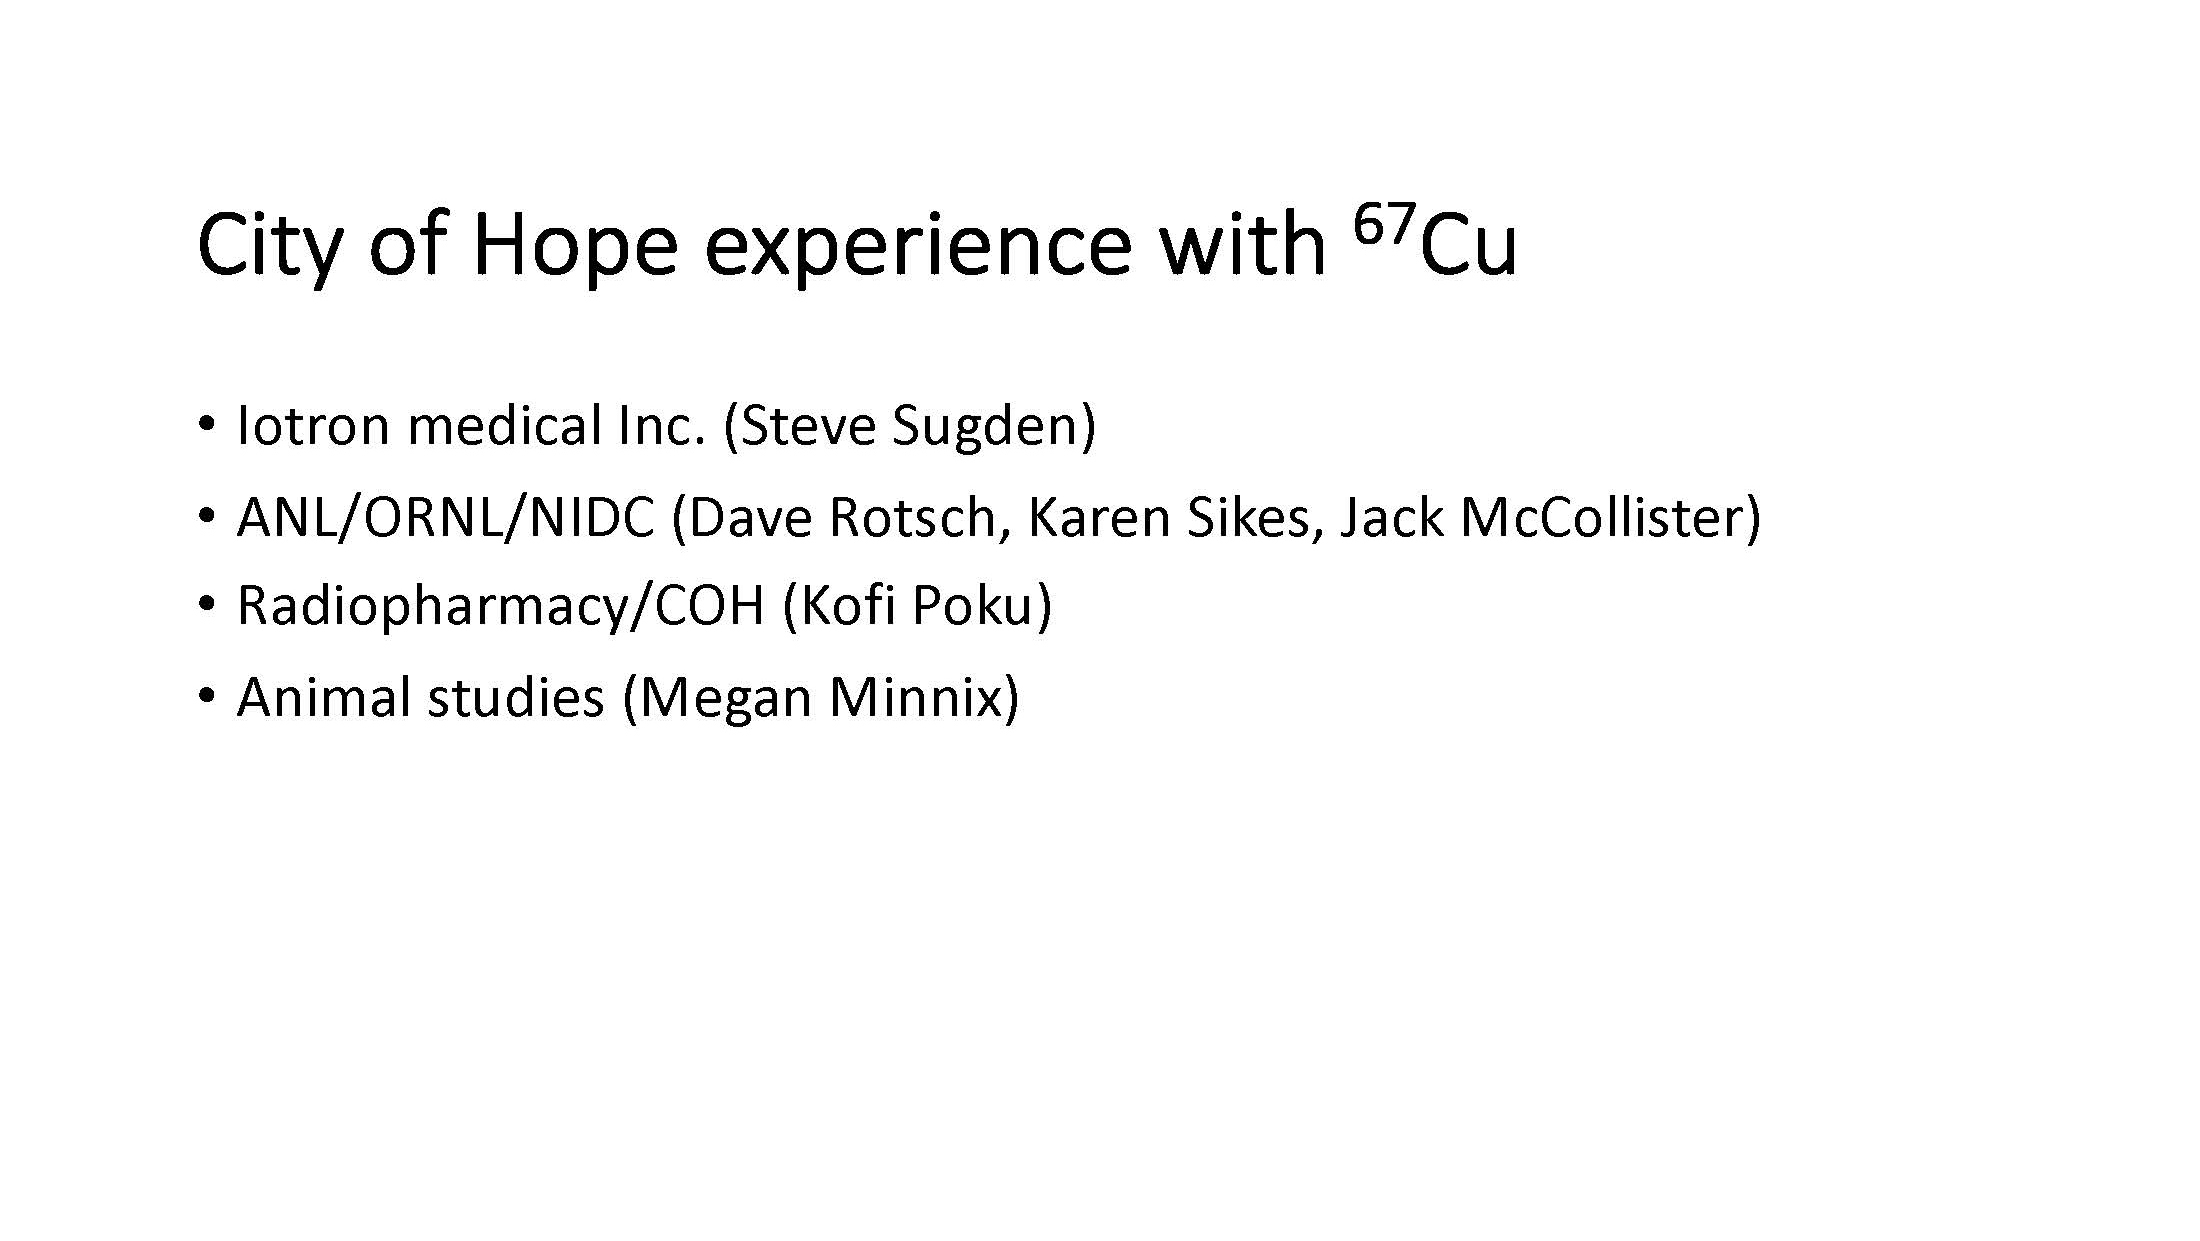 City of Hope Experience with Cu-67 by Dr. Jack Shively, City of Hope Medical Center